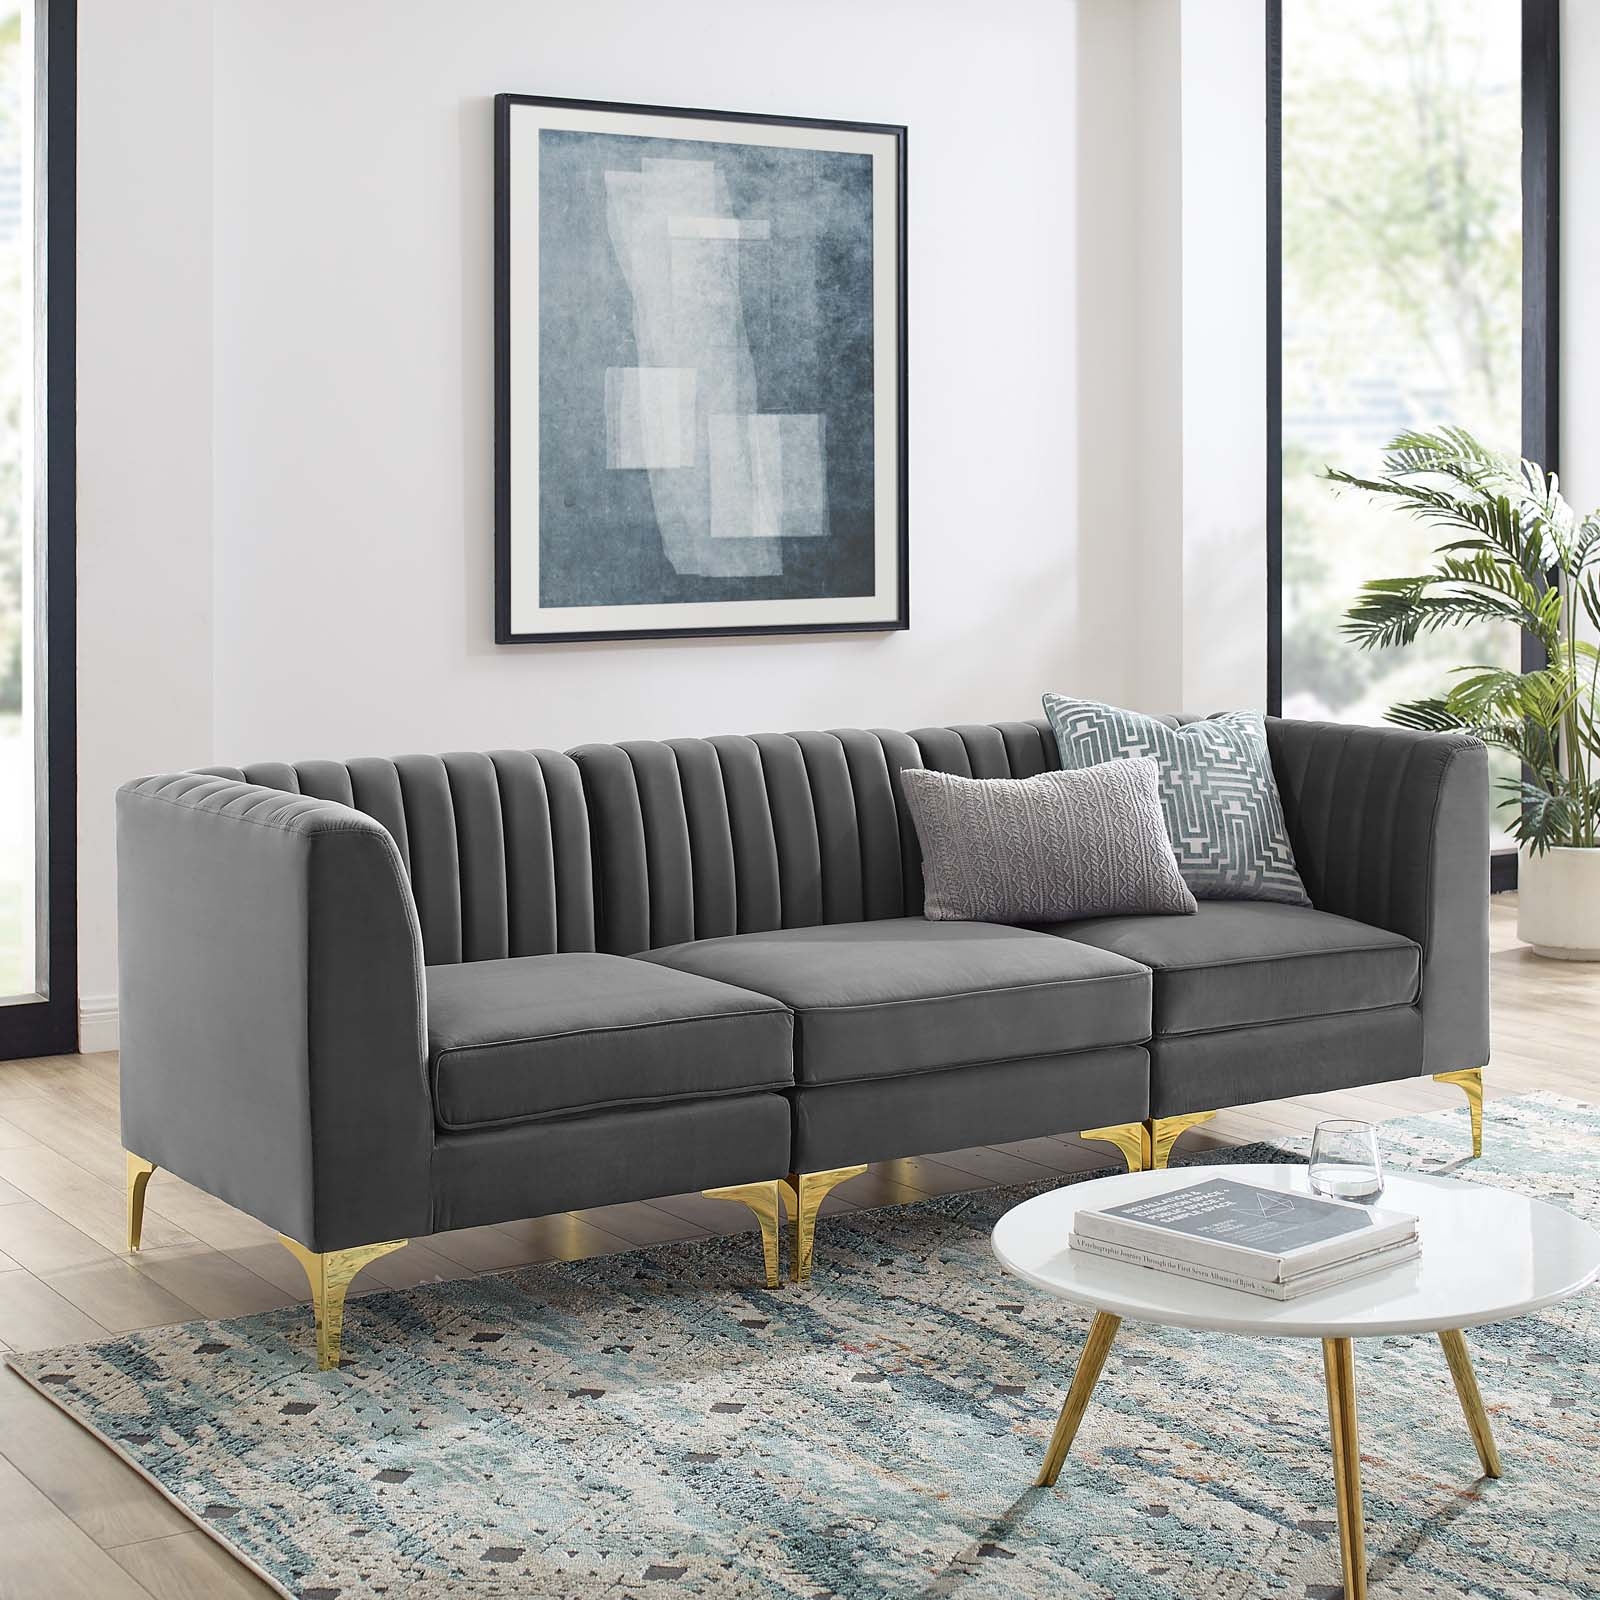 Triumph Channel Tufted Performance Velvet 3-Seater Sofa in Gray - Hyme ...